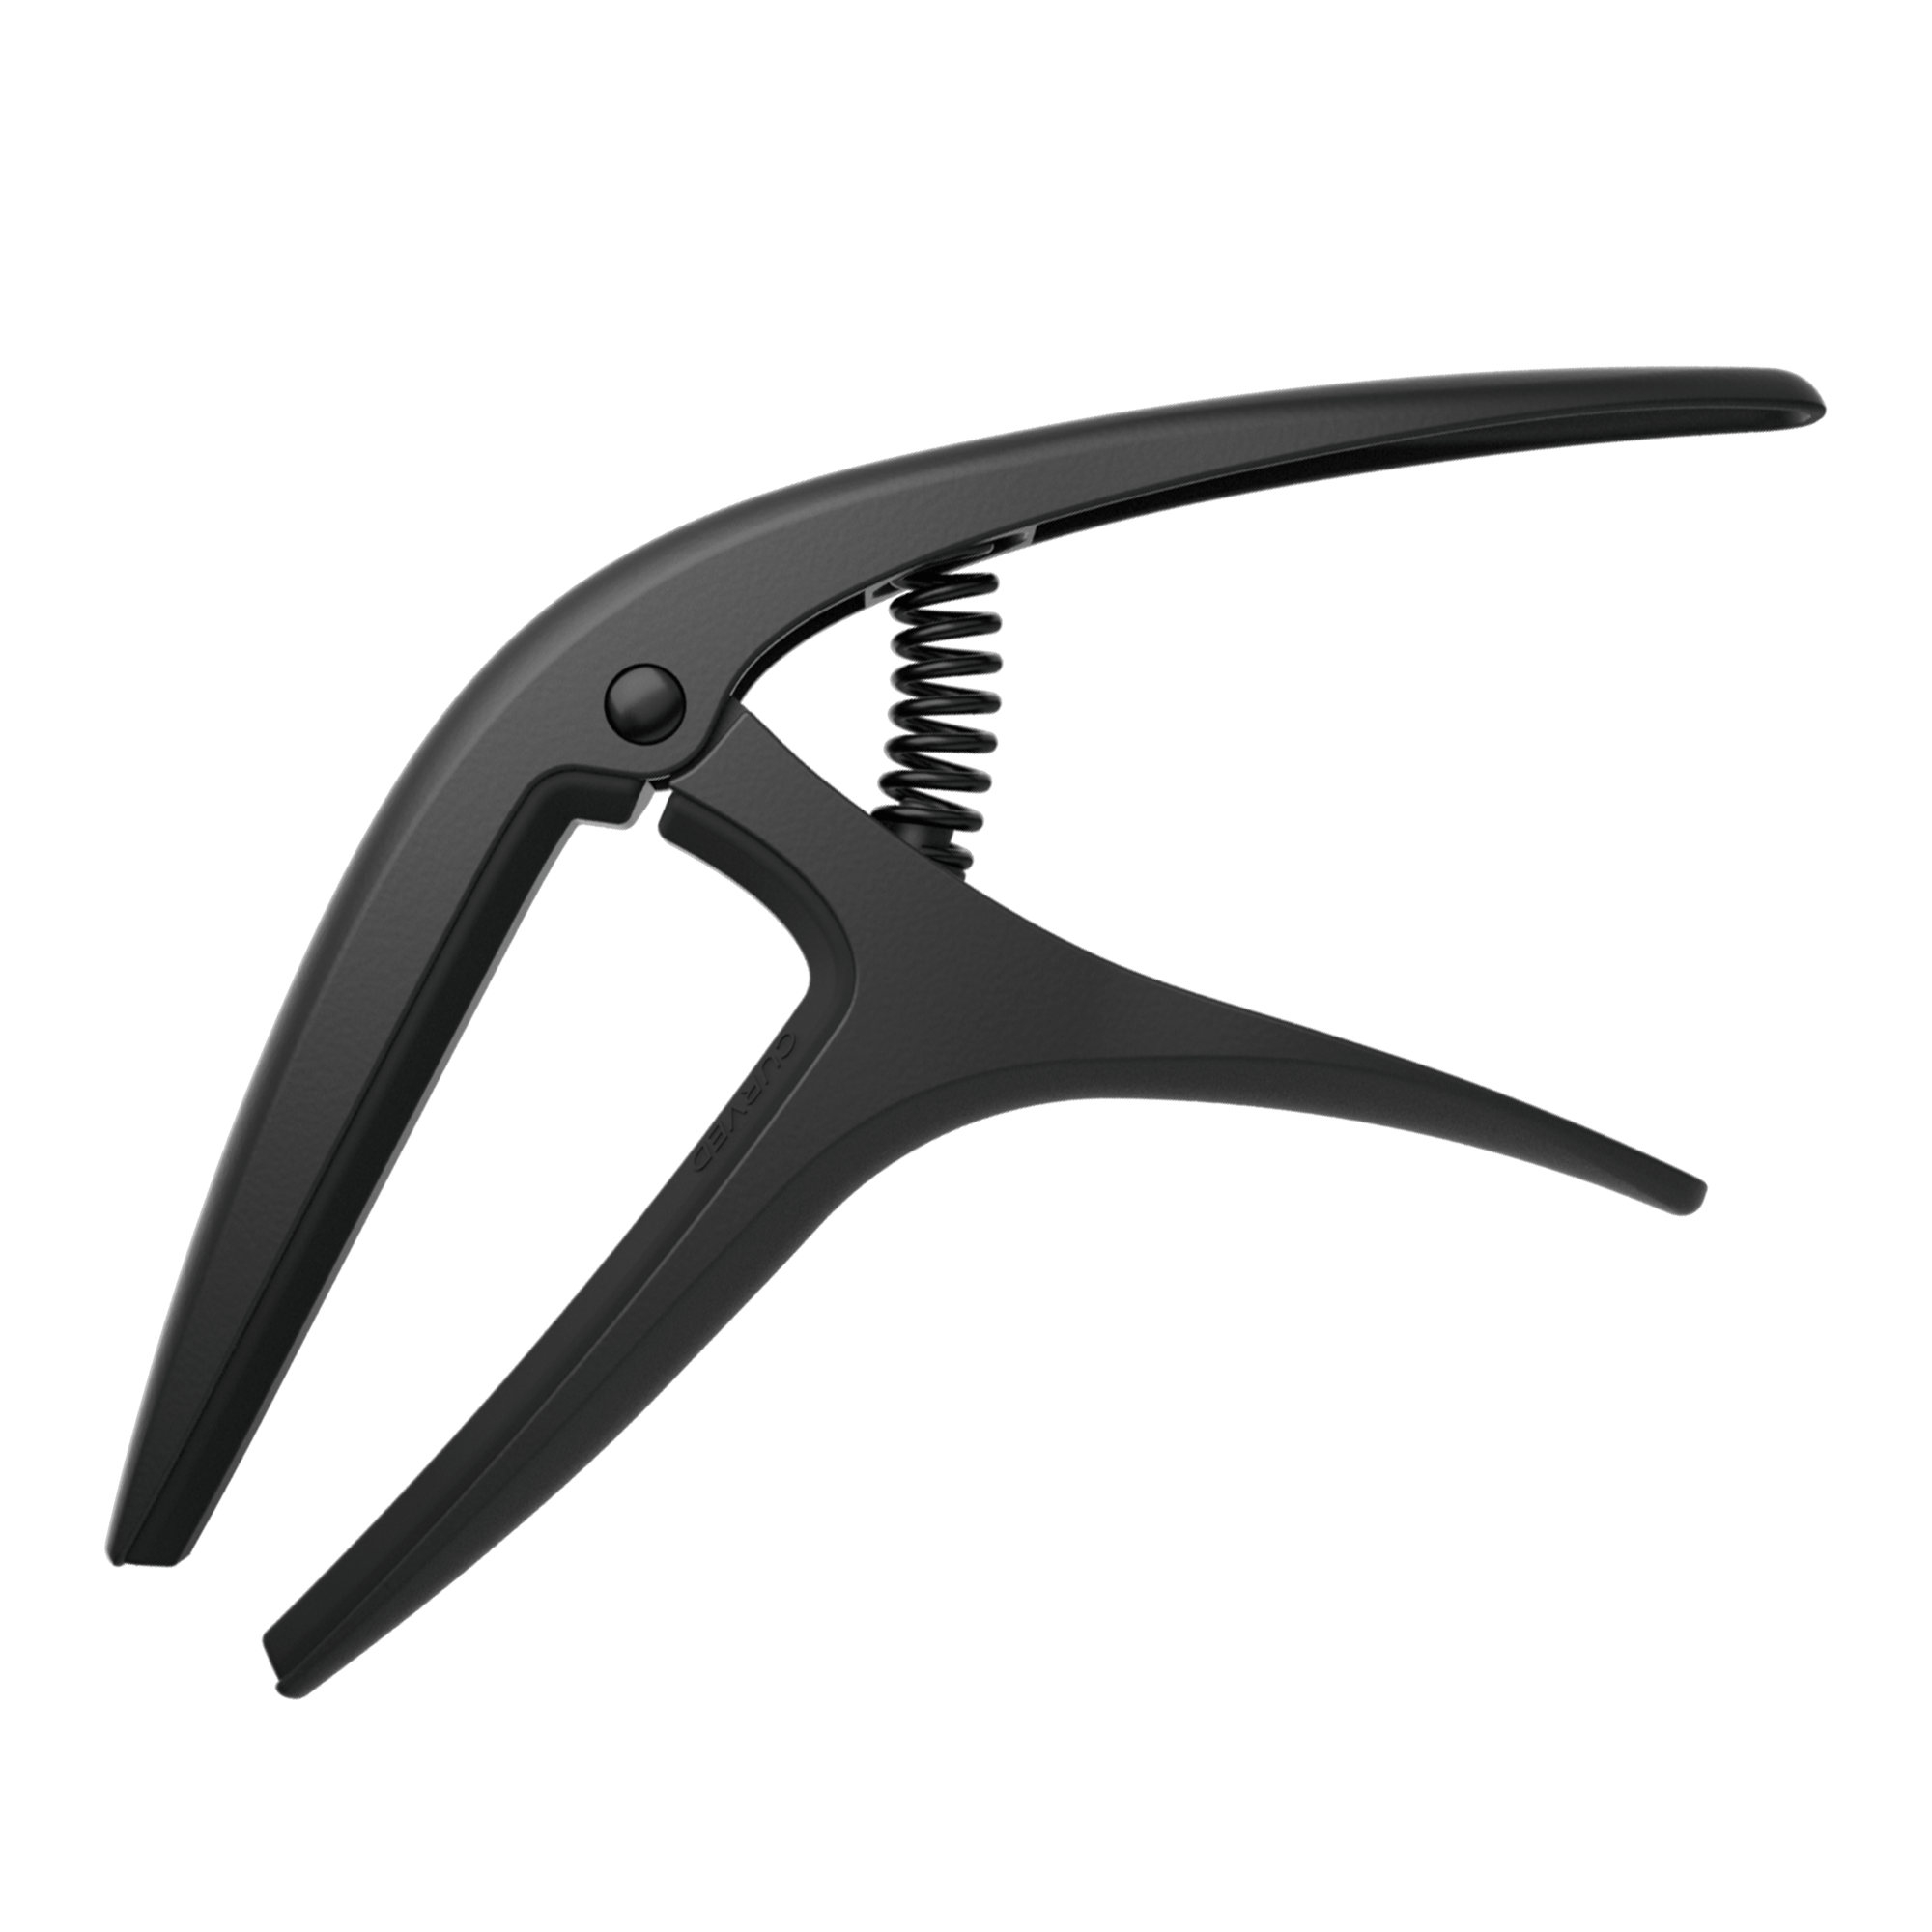 Ernie Ball Axis Capo; Two-Sided, Aluminum, and Classy